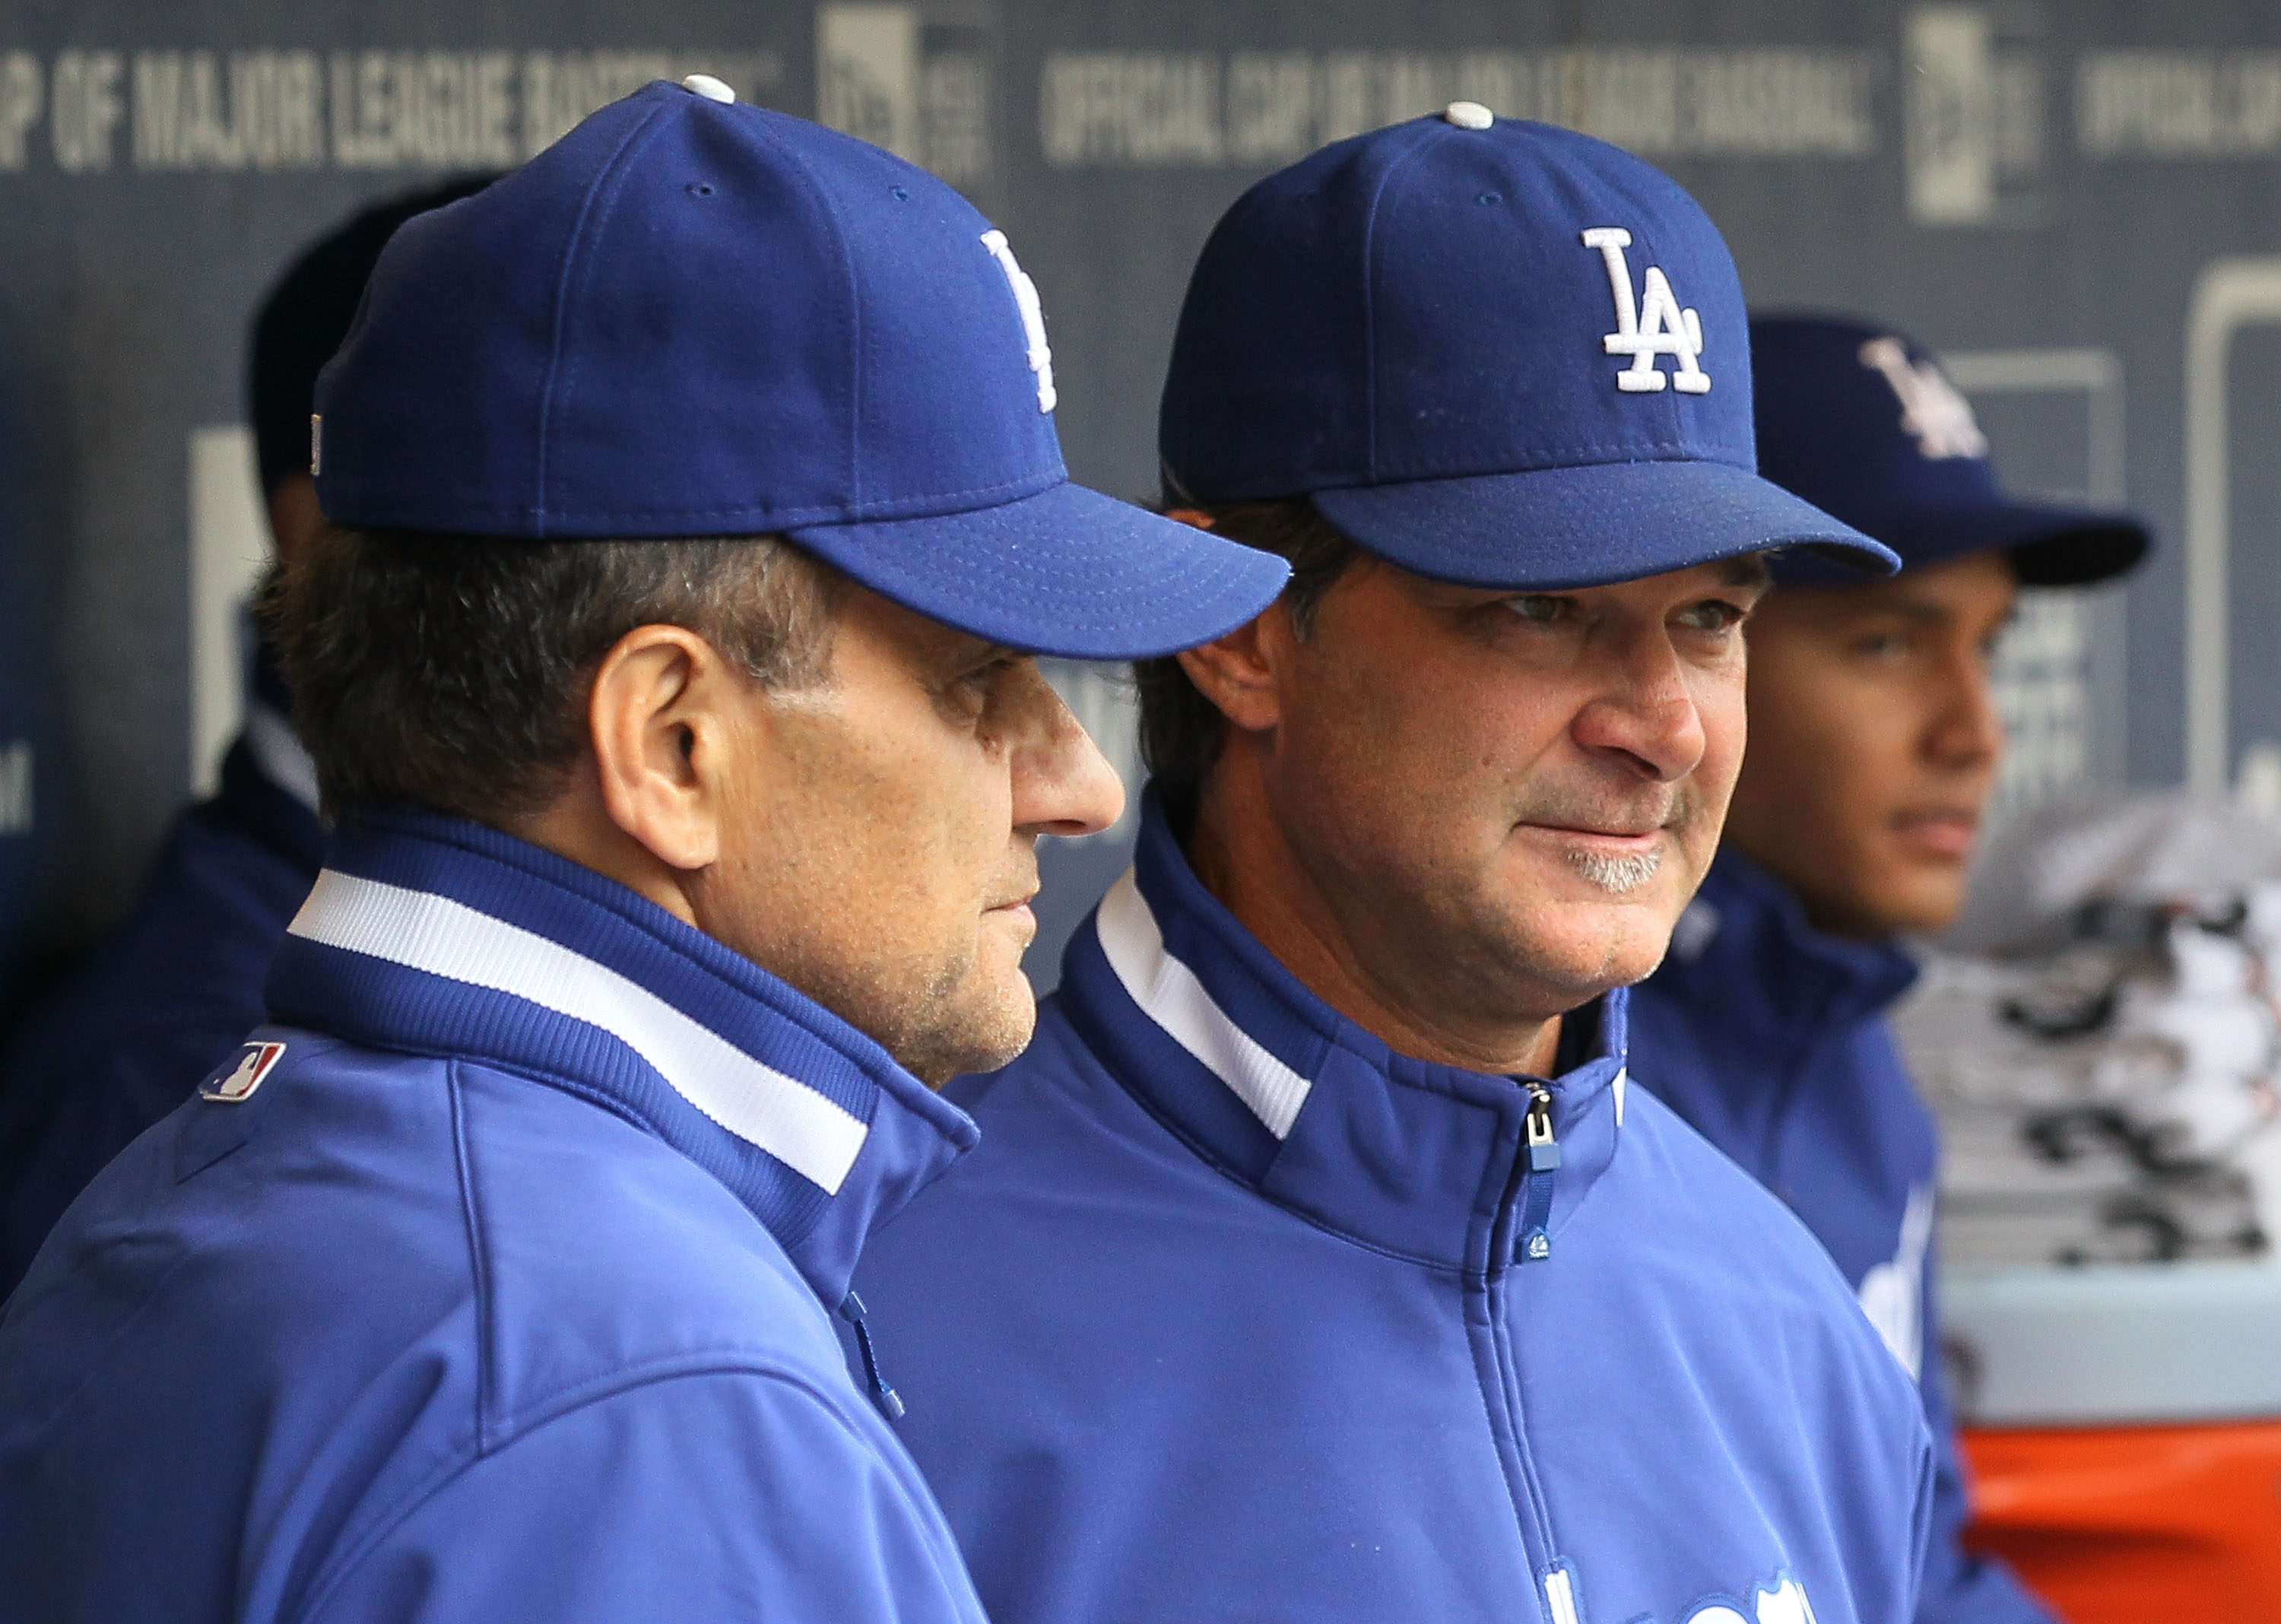 NEW YORK - APRIL 28:  Manager Joe Torre and hitting coach Don Mattingly of the Los Angeles Dodgers look on before their game against the New York Mets on April 28, 2010 at Citi Field in the Flushing neighborhood of the Queens borough of New York City.  (P